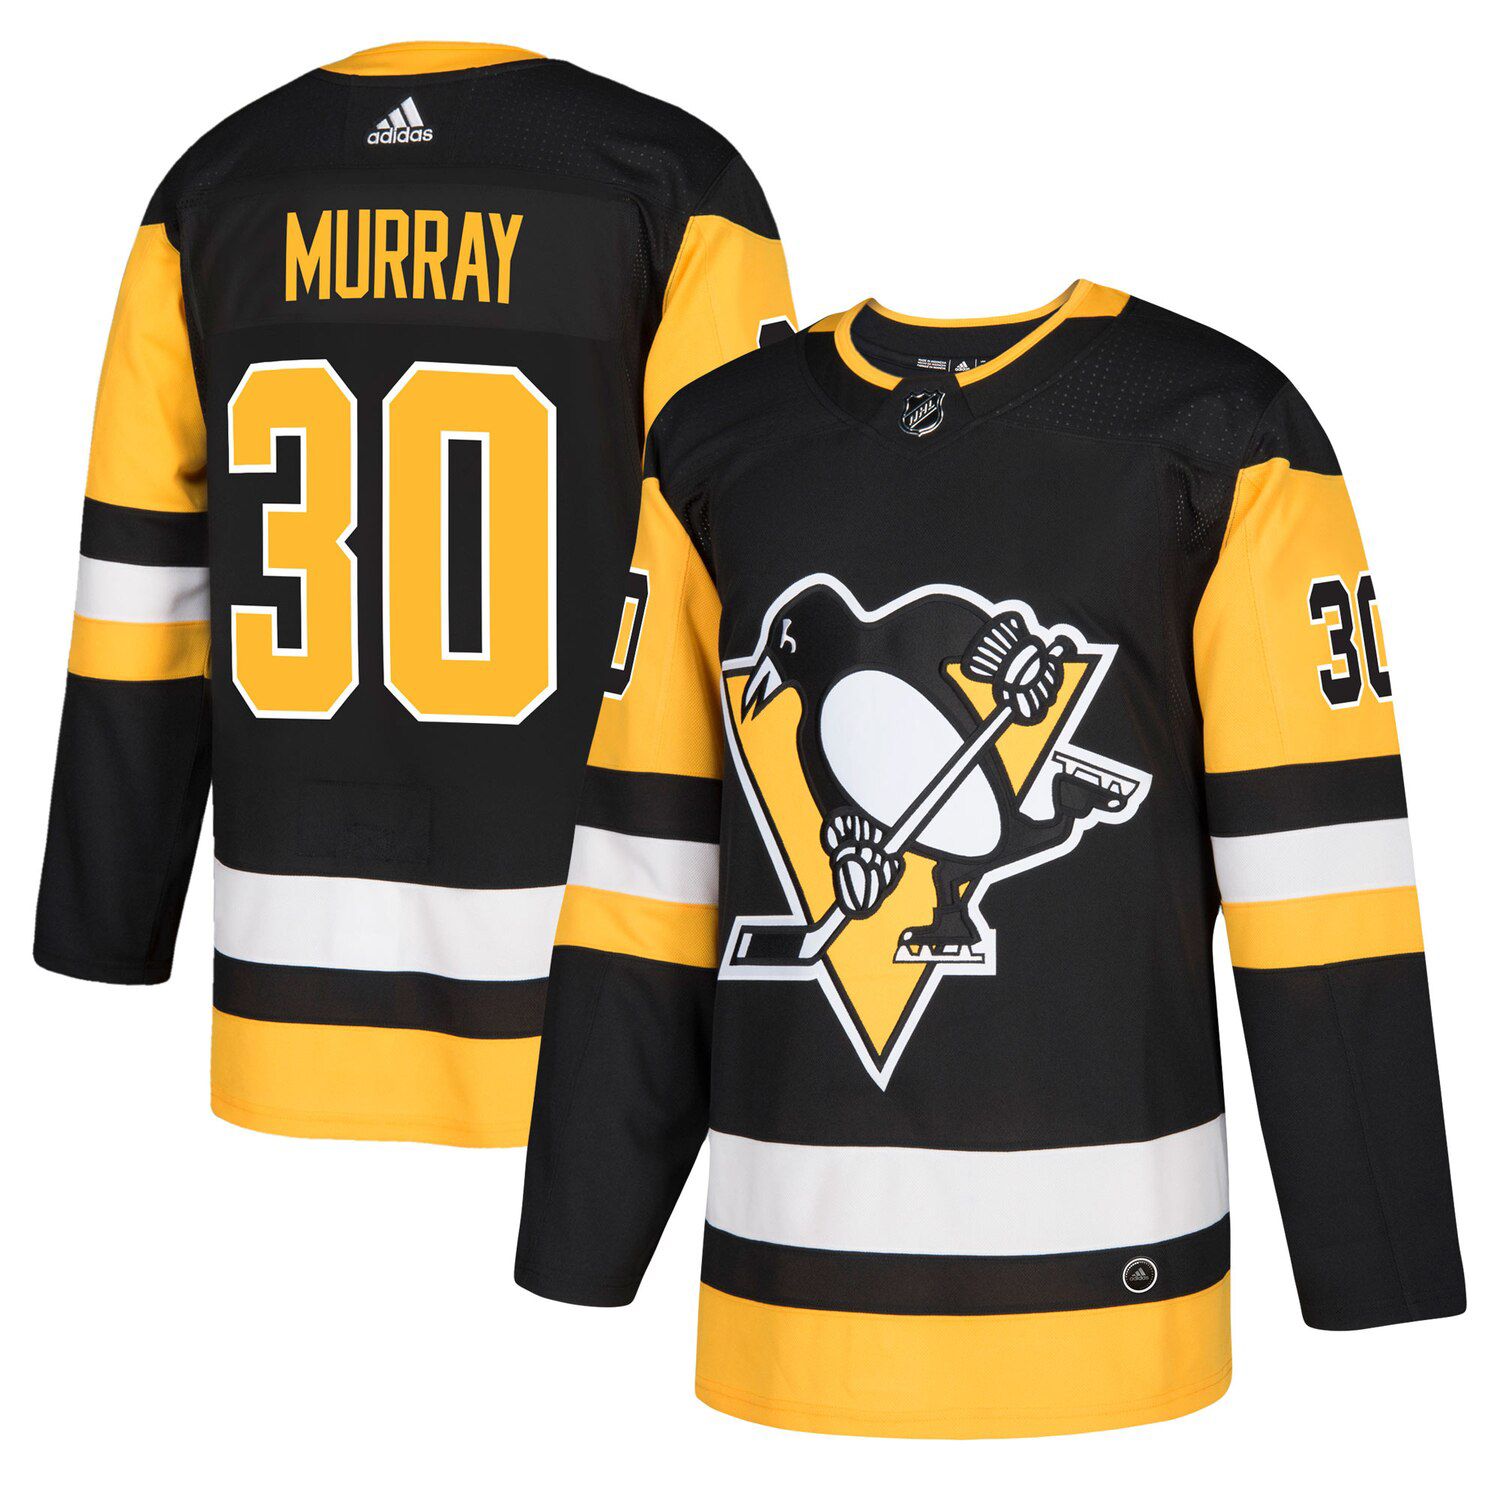 cheap authentic pittsburgh penguins jerseys